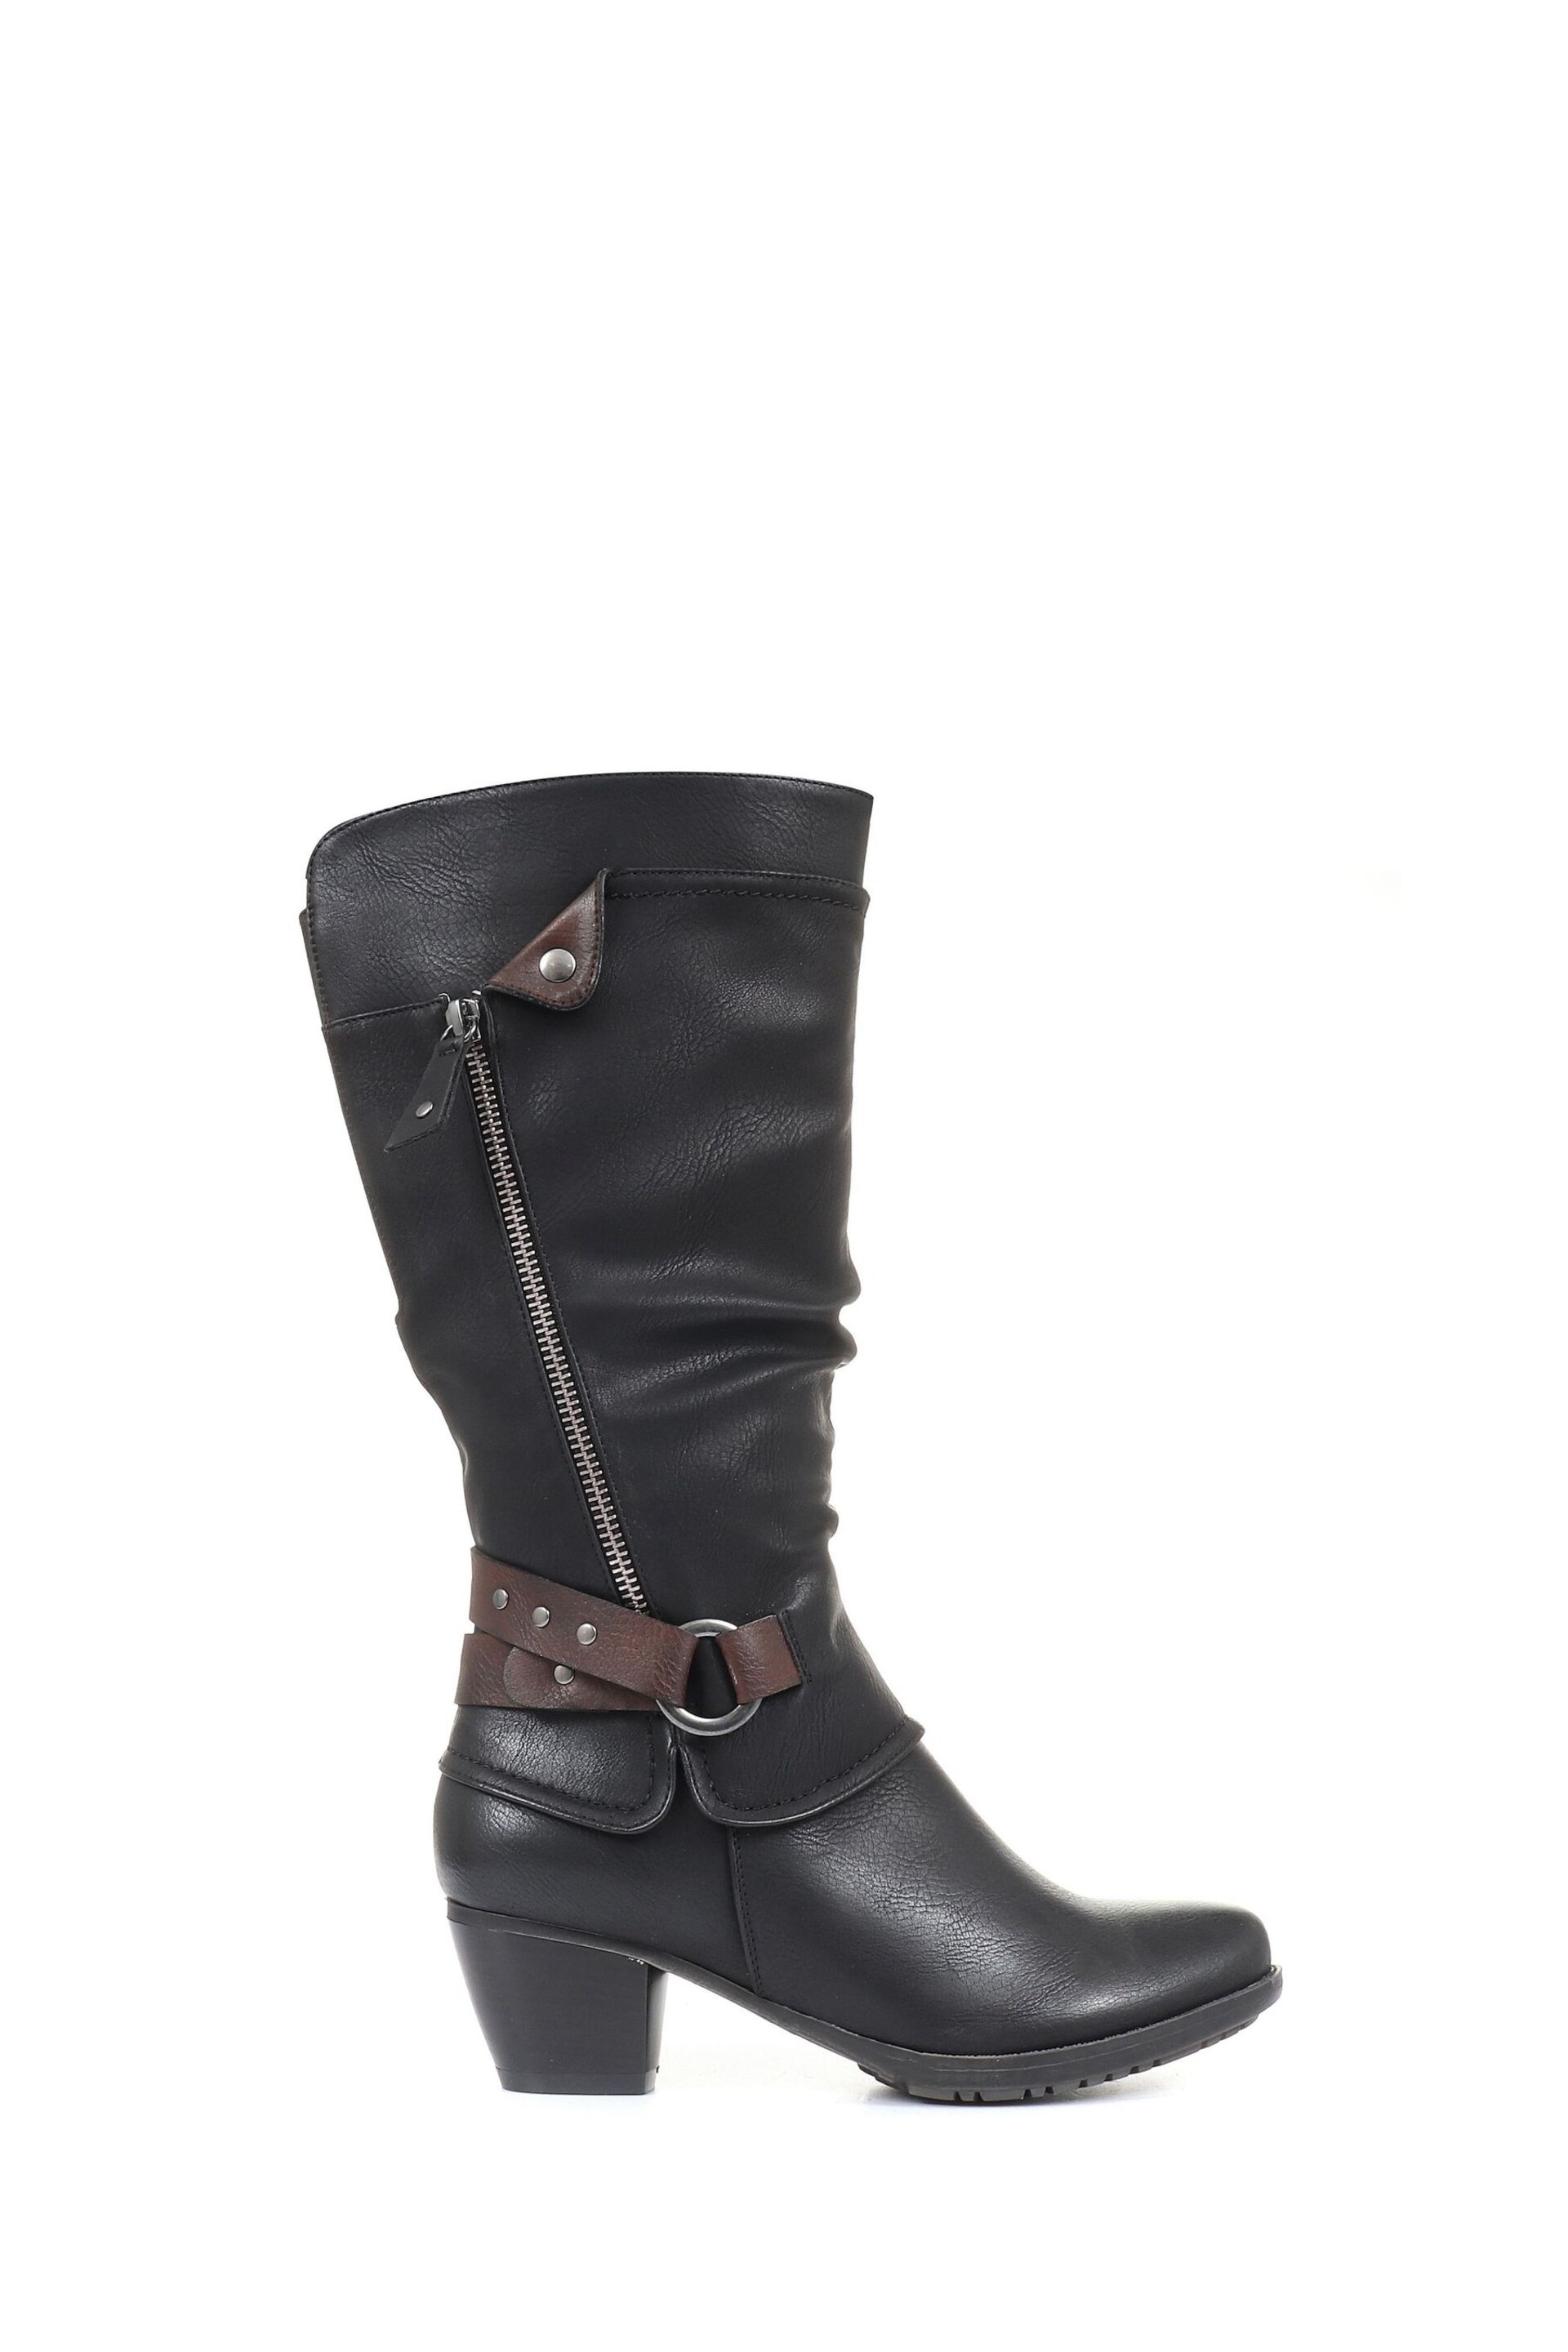 Pavers Low Heeled Slouch Boots - Image 1 of 5